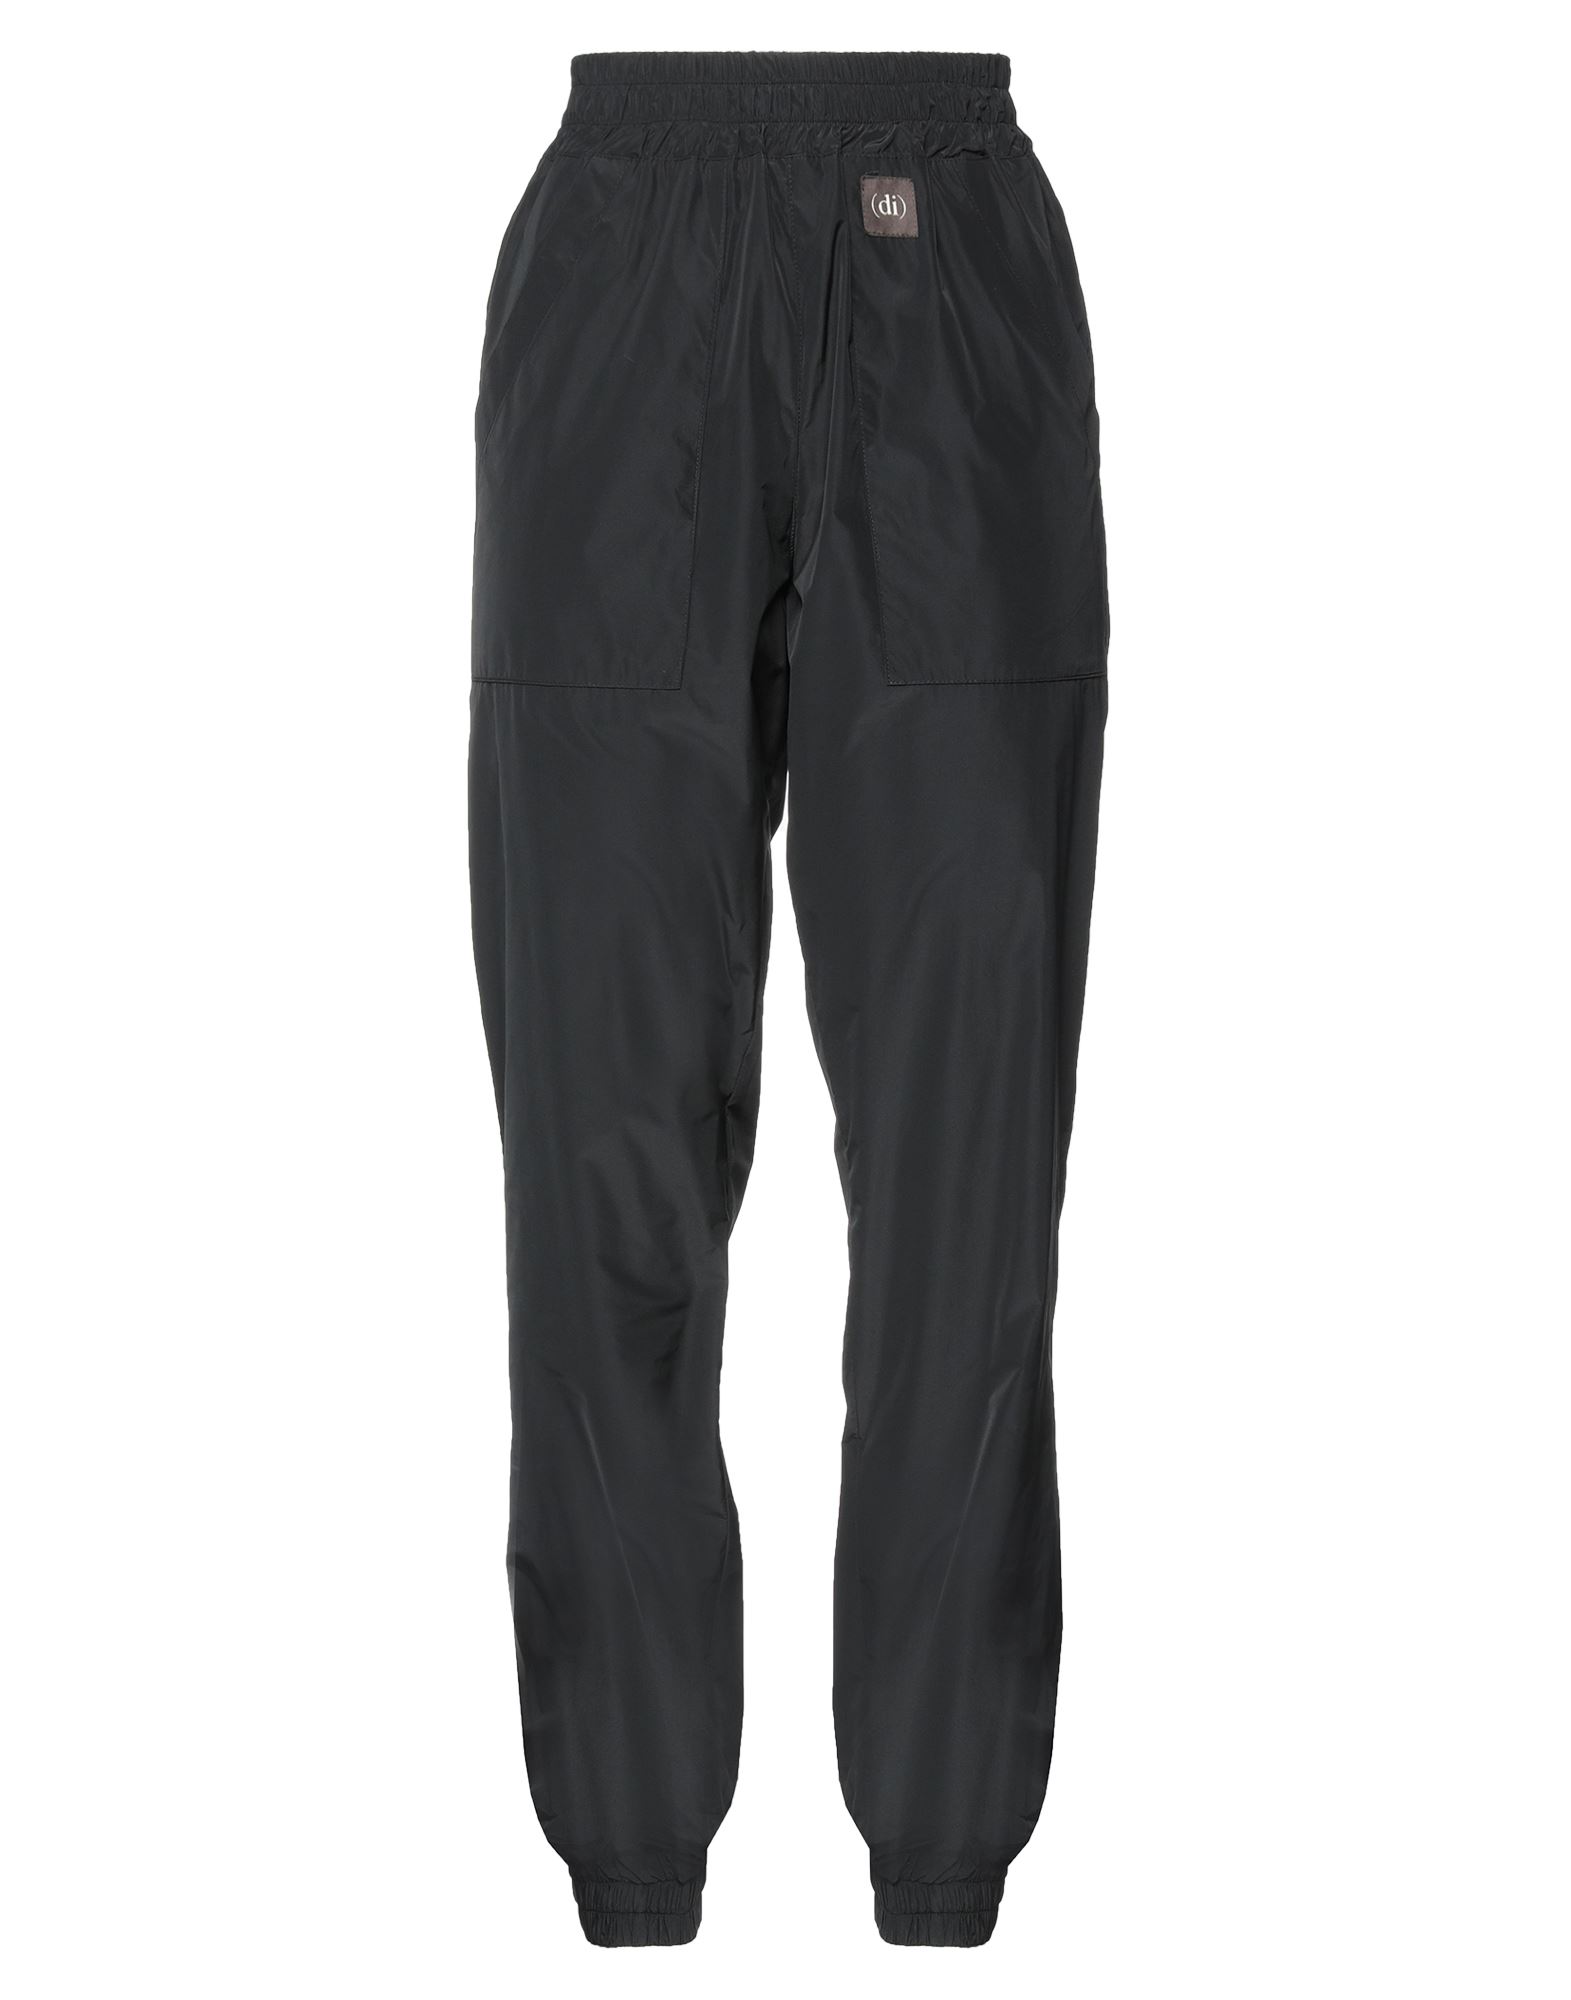 (d)ivision (di)vision Woman Pants Black Size S Polyester